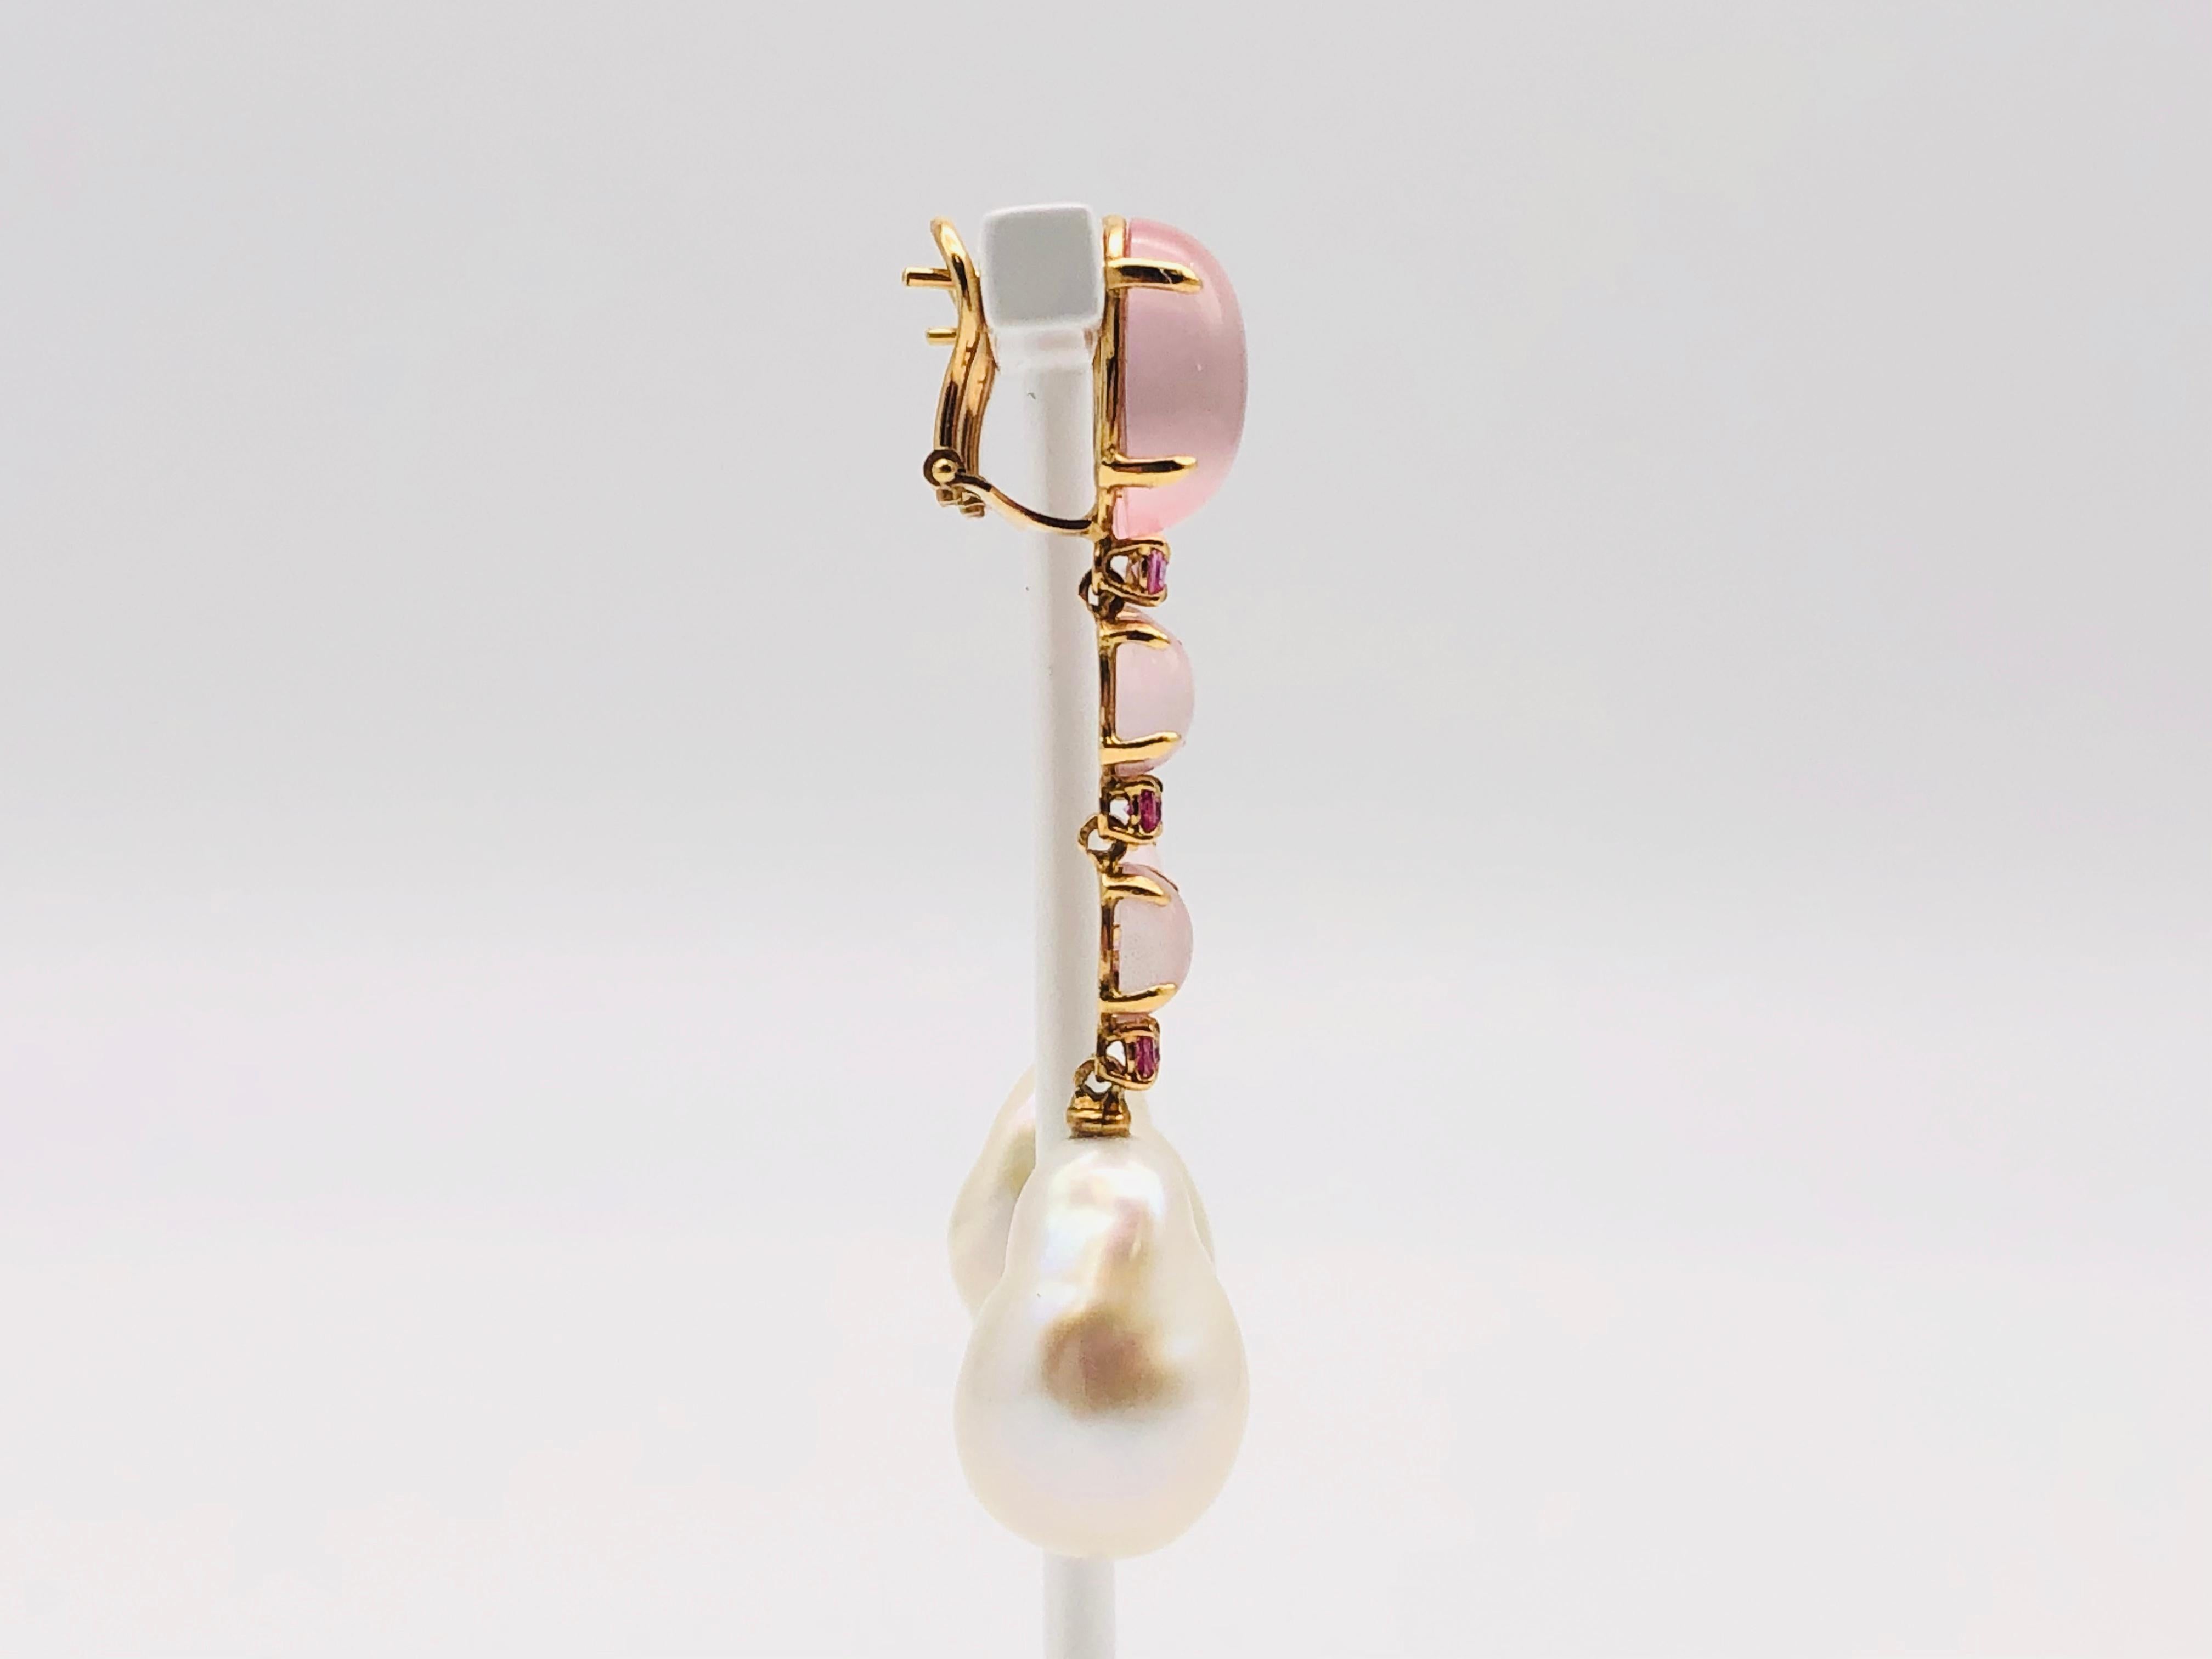 Oval Cut Quartz, Tourmalines and Baroque Pearls on Yellow Gold Earrings